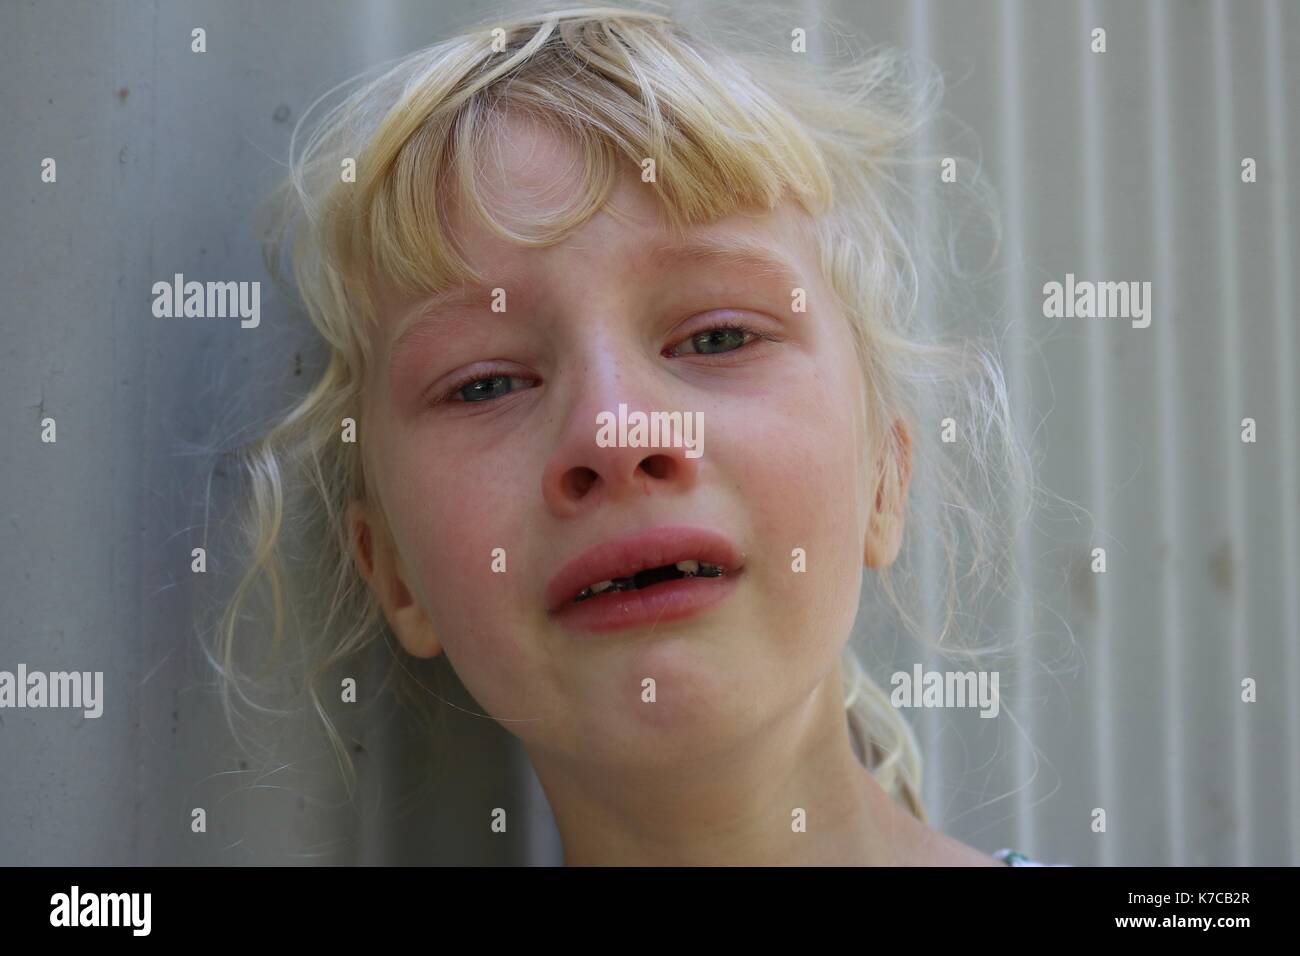 Young girl crying in pain Stock Photo